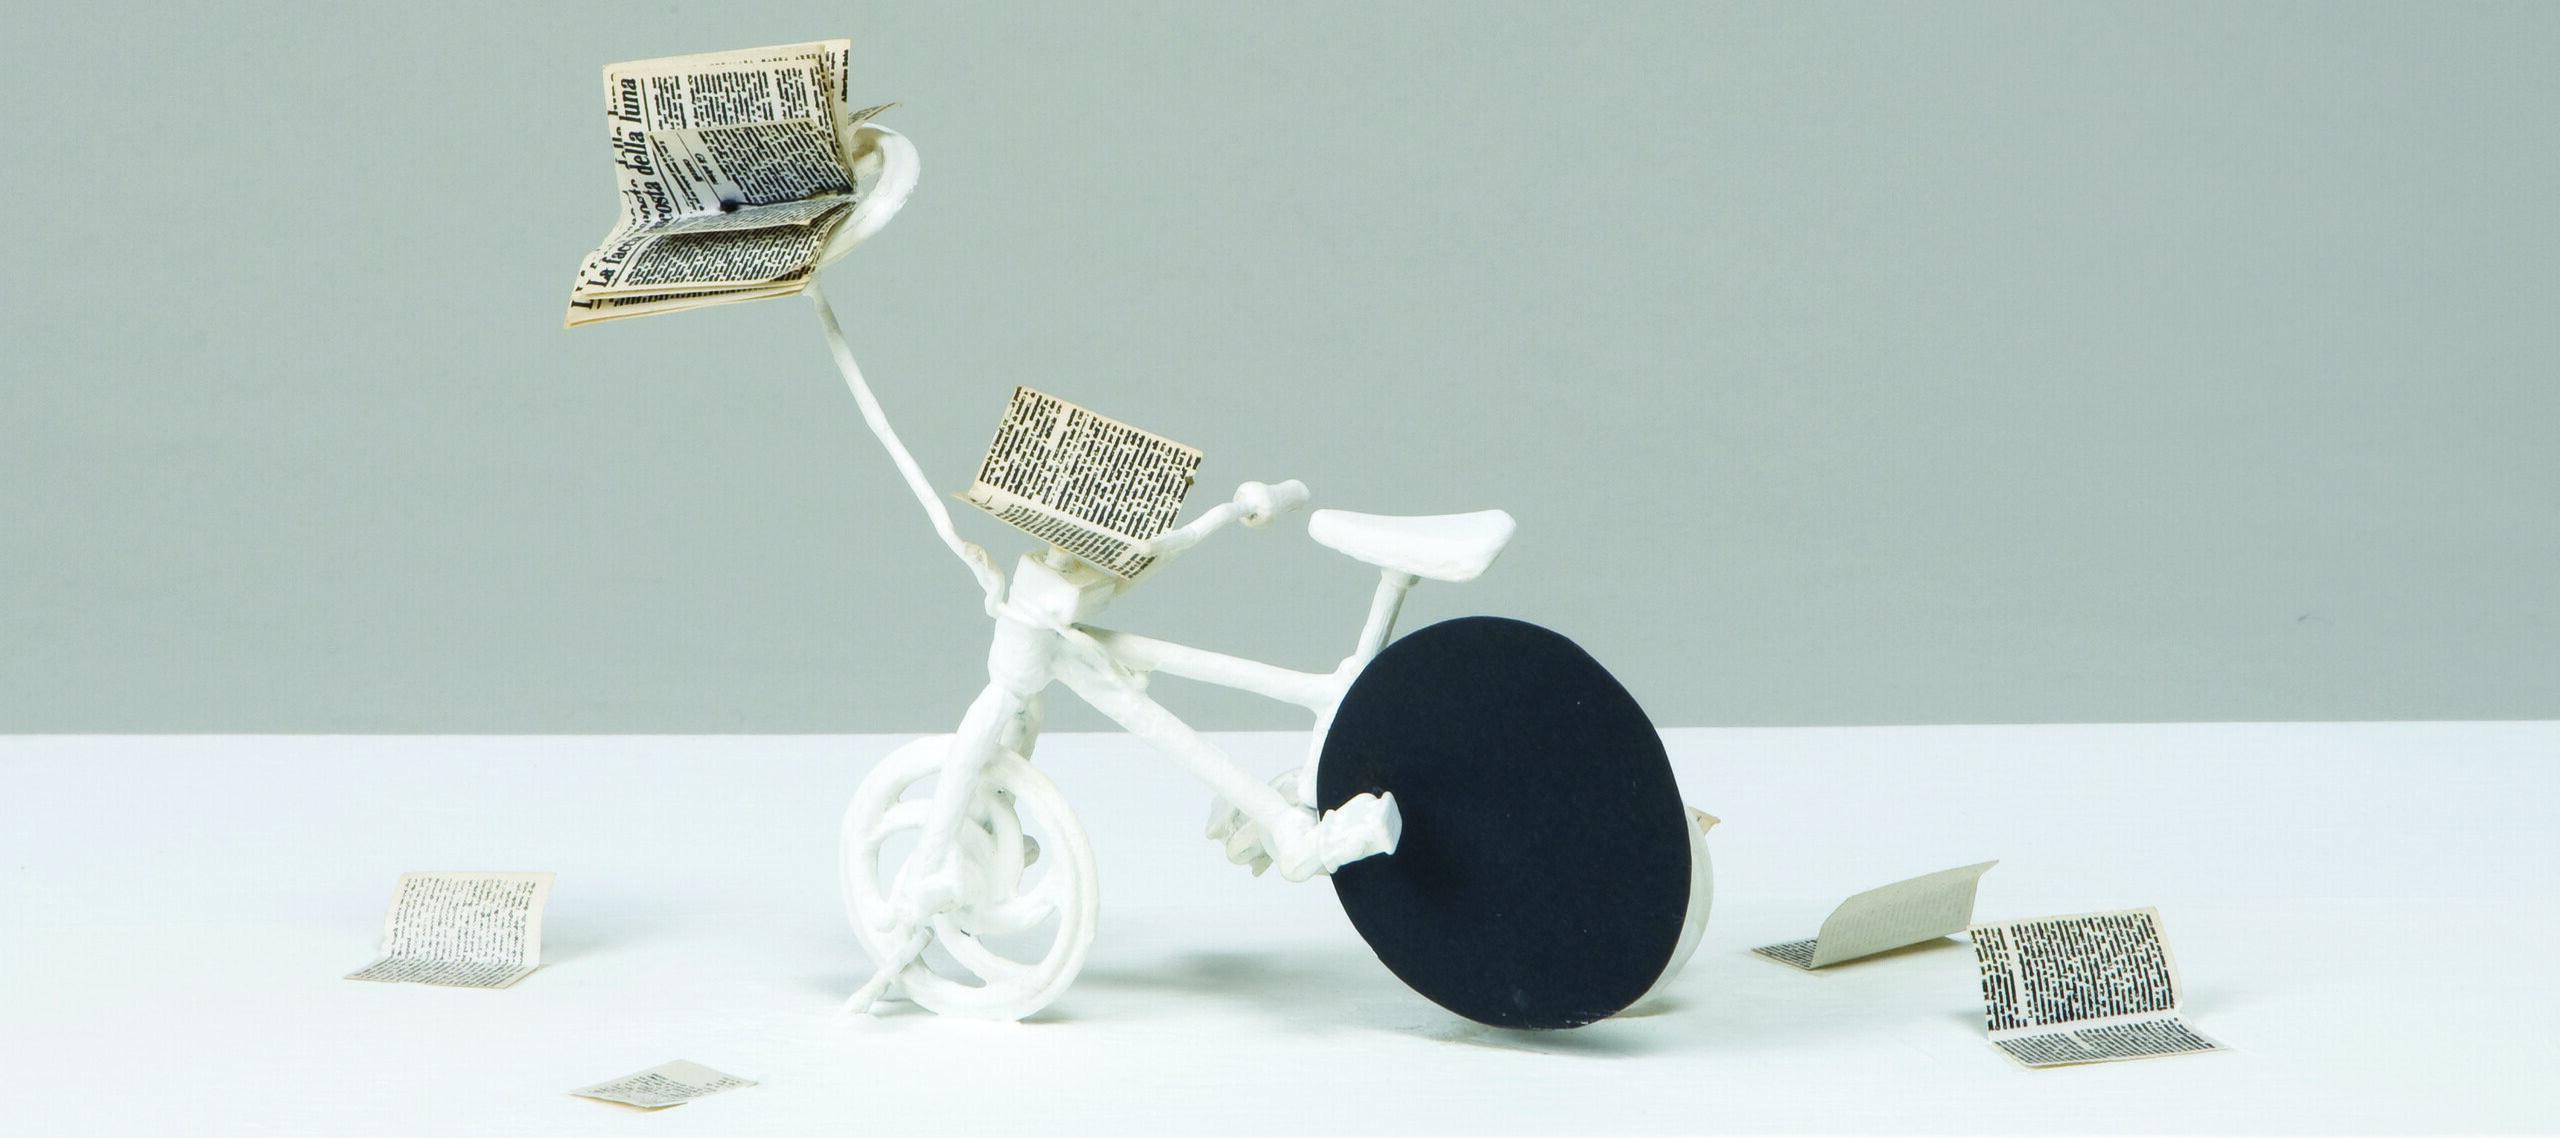 A tiny bicycle sculpture with a tiny book attached to it, as well as several books lying next to it.